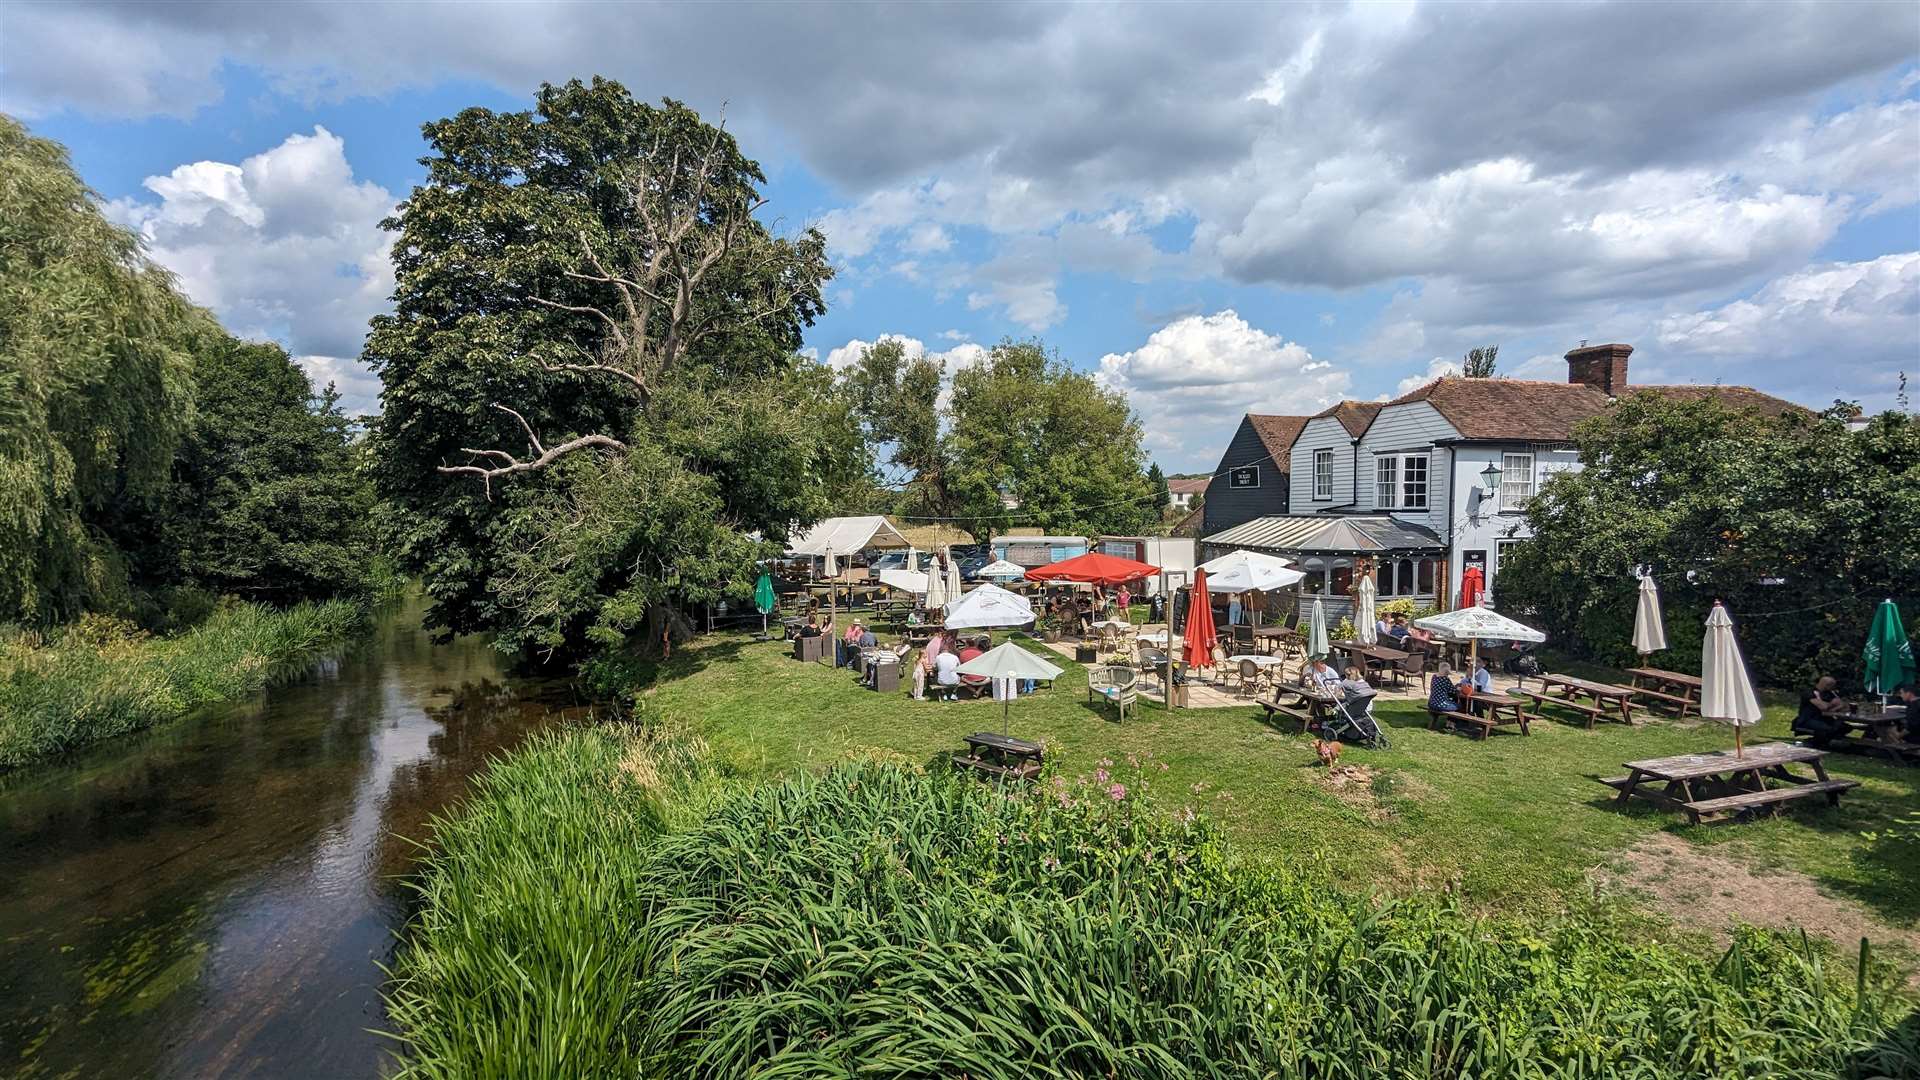 The Tickled Trout’s excellent beer garden is the perfect spot on a summer’s day – if the rain stays away